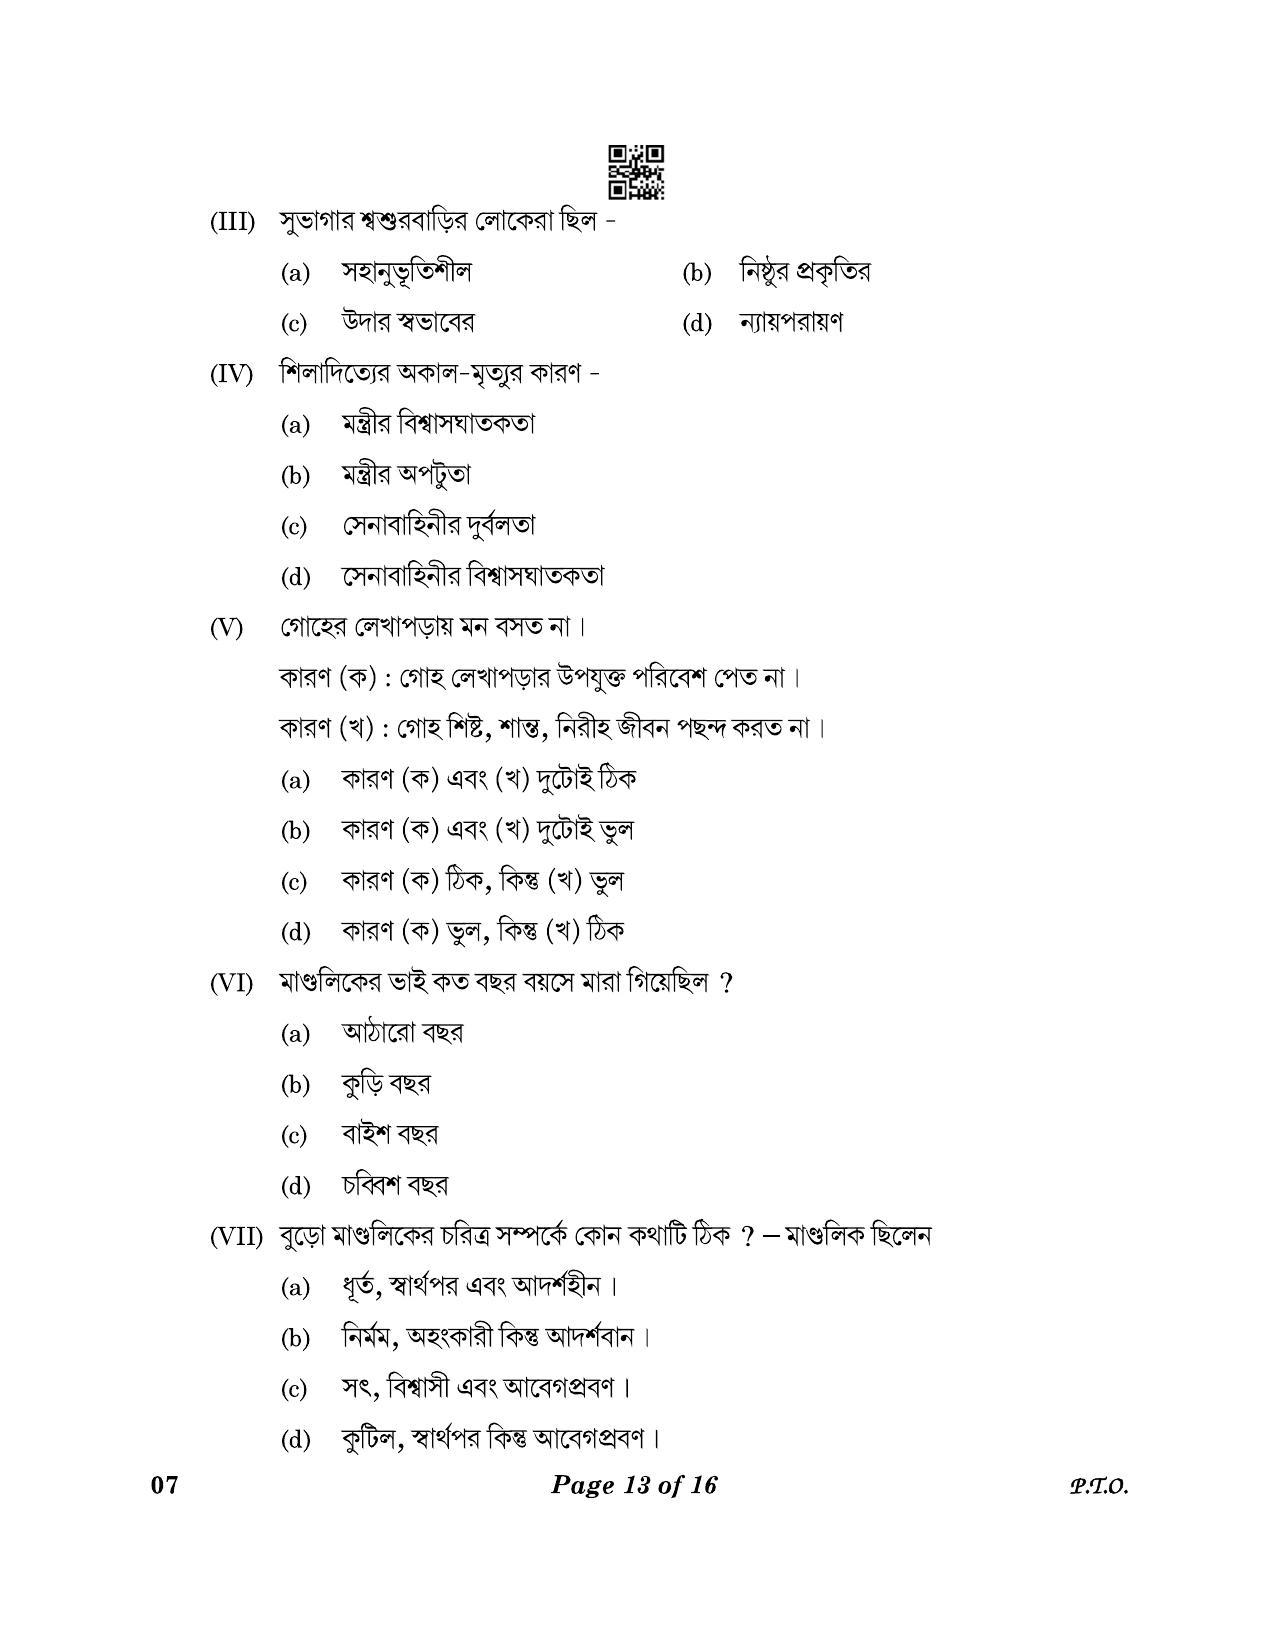 CBSE Class 10 07_Bengali 2023 Question Paper - Page 13